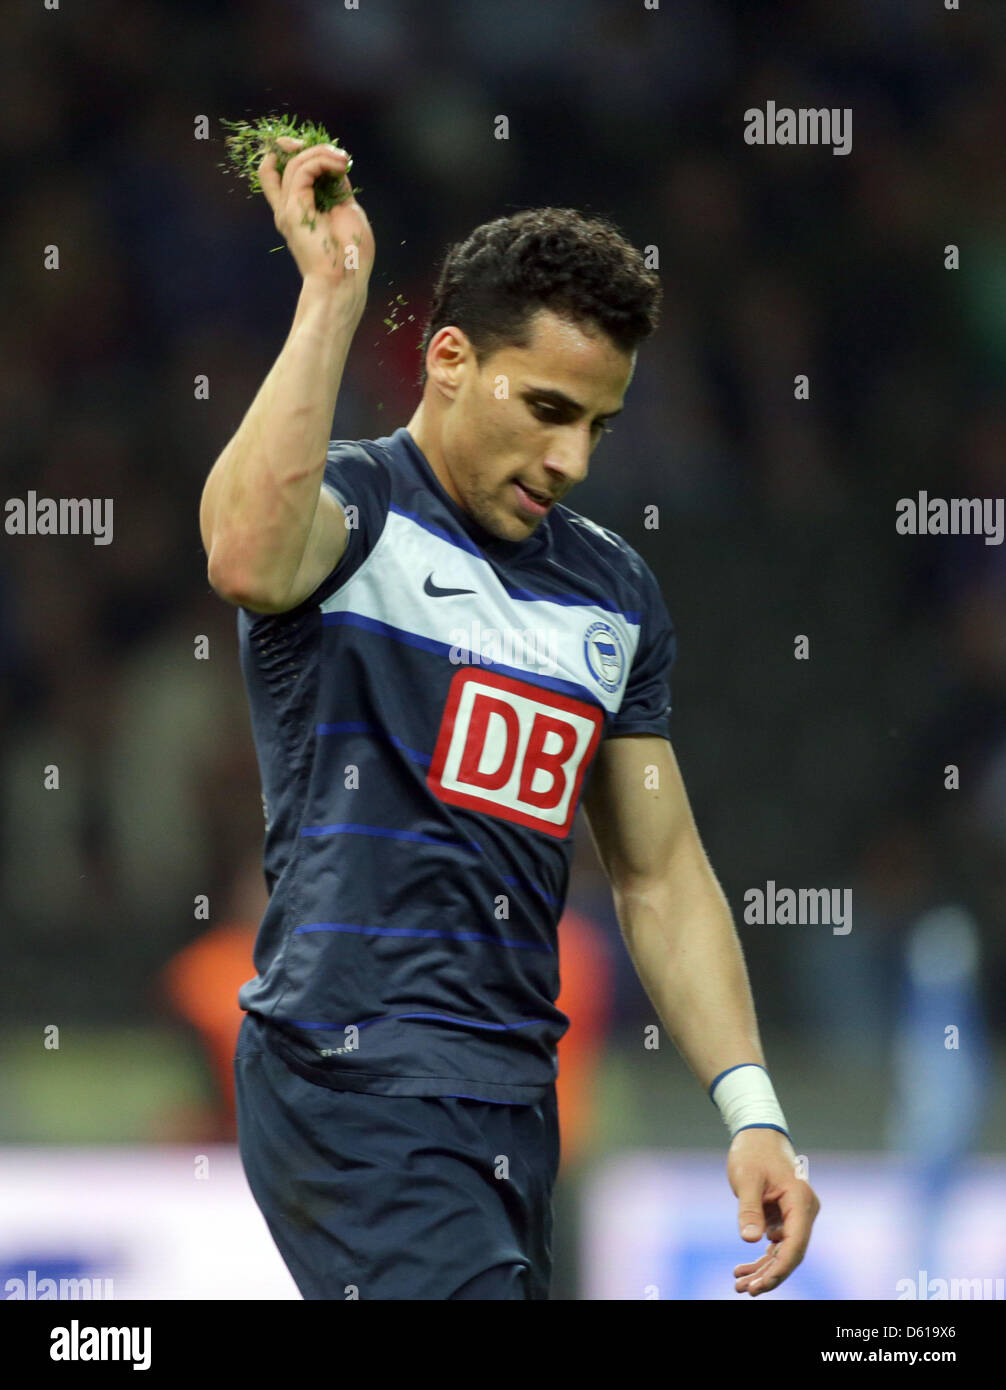 Hertha's Aenis Ben-Hatira reacts after a missed opportunity during the Bundesliga soccer match between Hertha BSC and SC Freiburg at the Olympic Stadium in Berlin, Germany, 10 April 2012. Photo: Kay Nietfeld Stock Photo